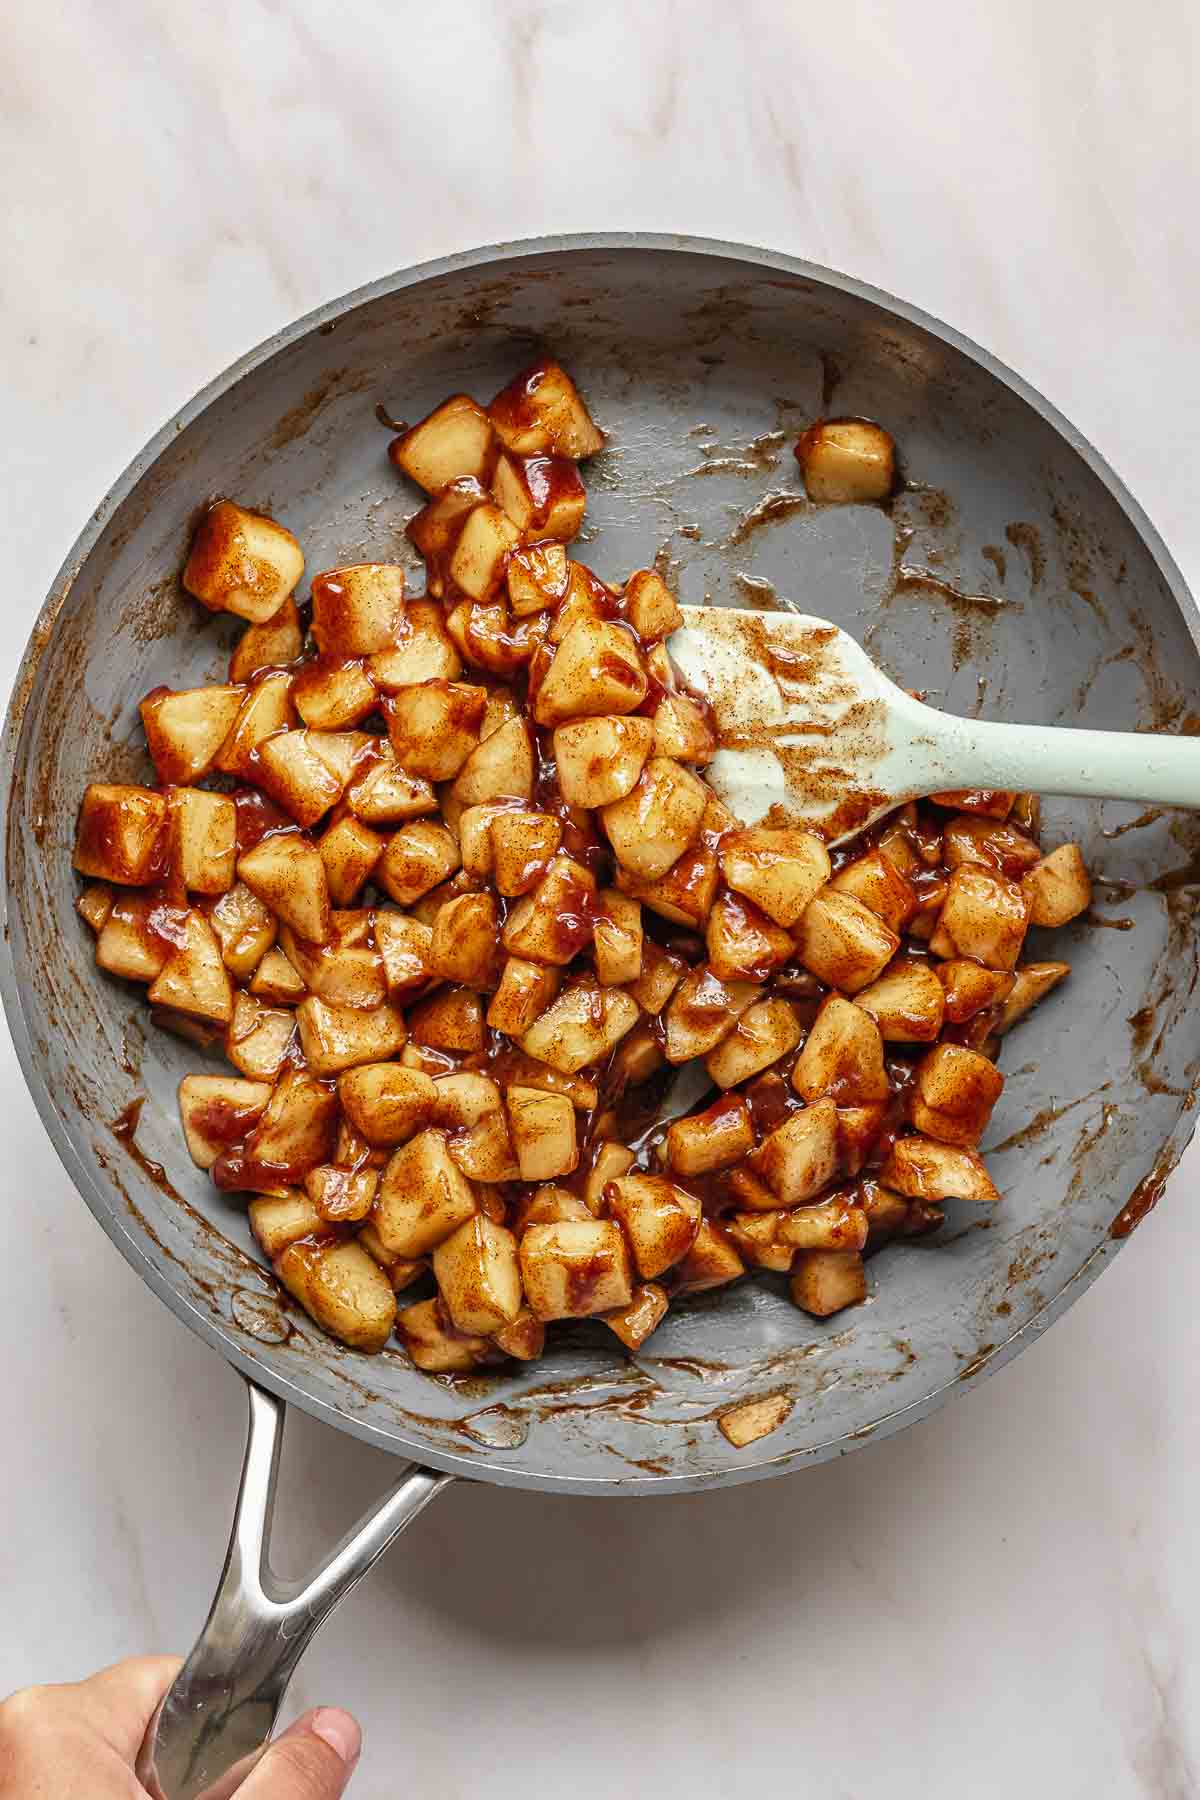 A spatula tosses spiced apples in a frying pan.